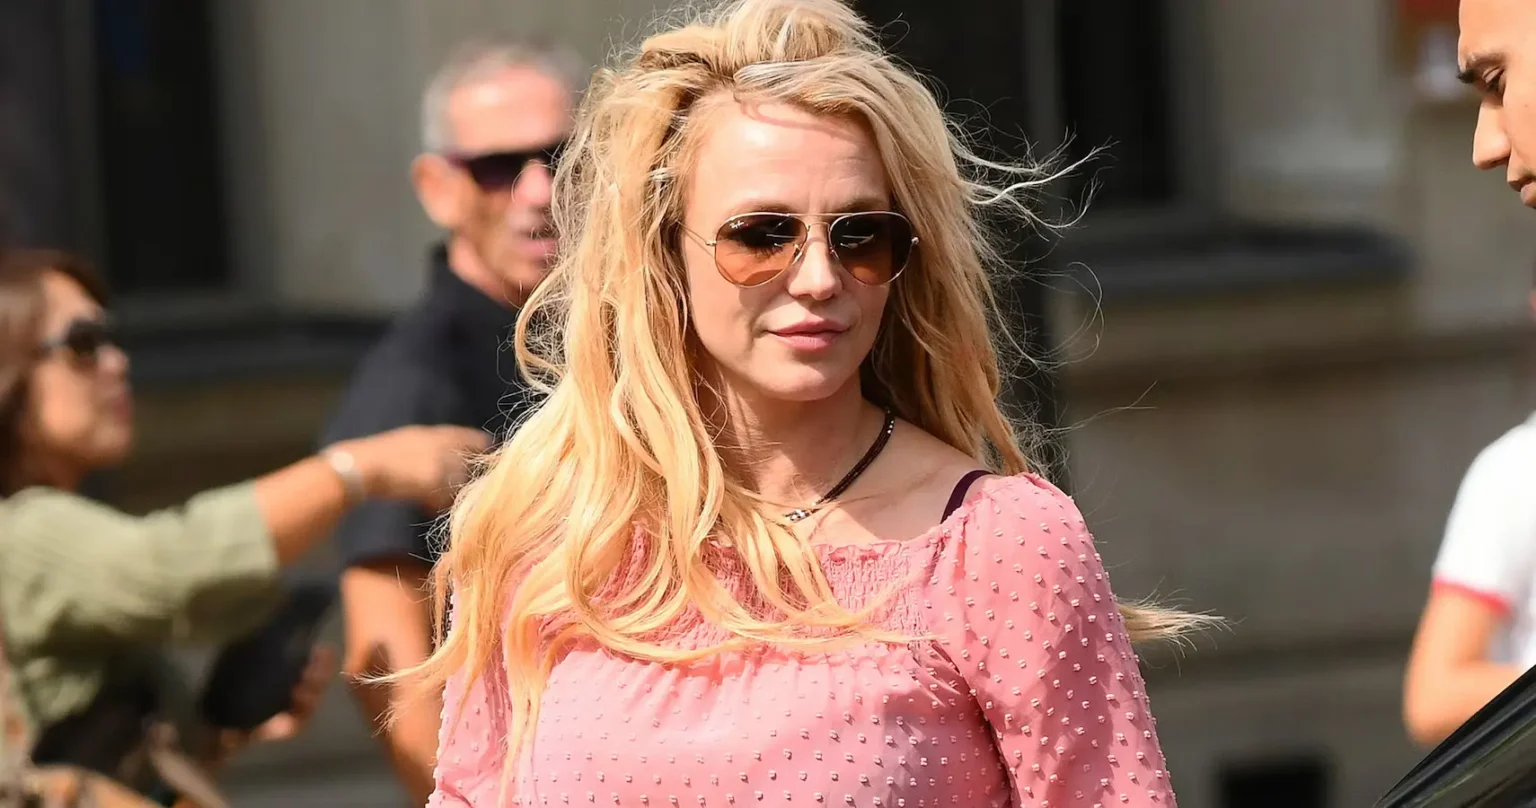 britney-spears-conservatorship-fight-with-her-estranged-father-has-officially-ended